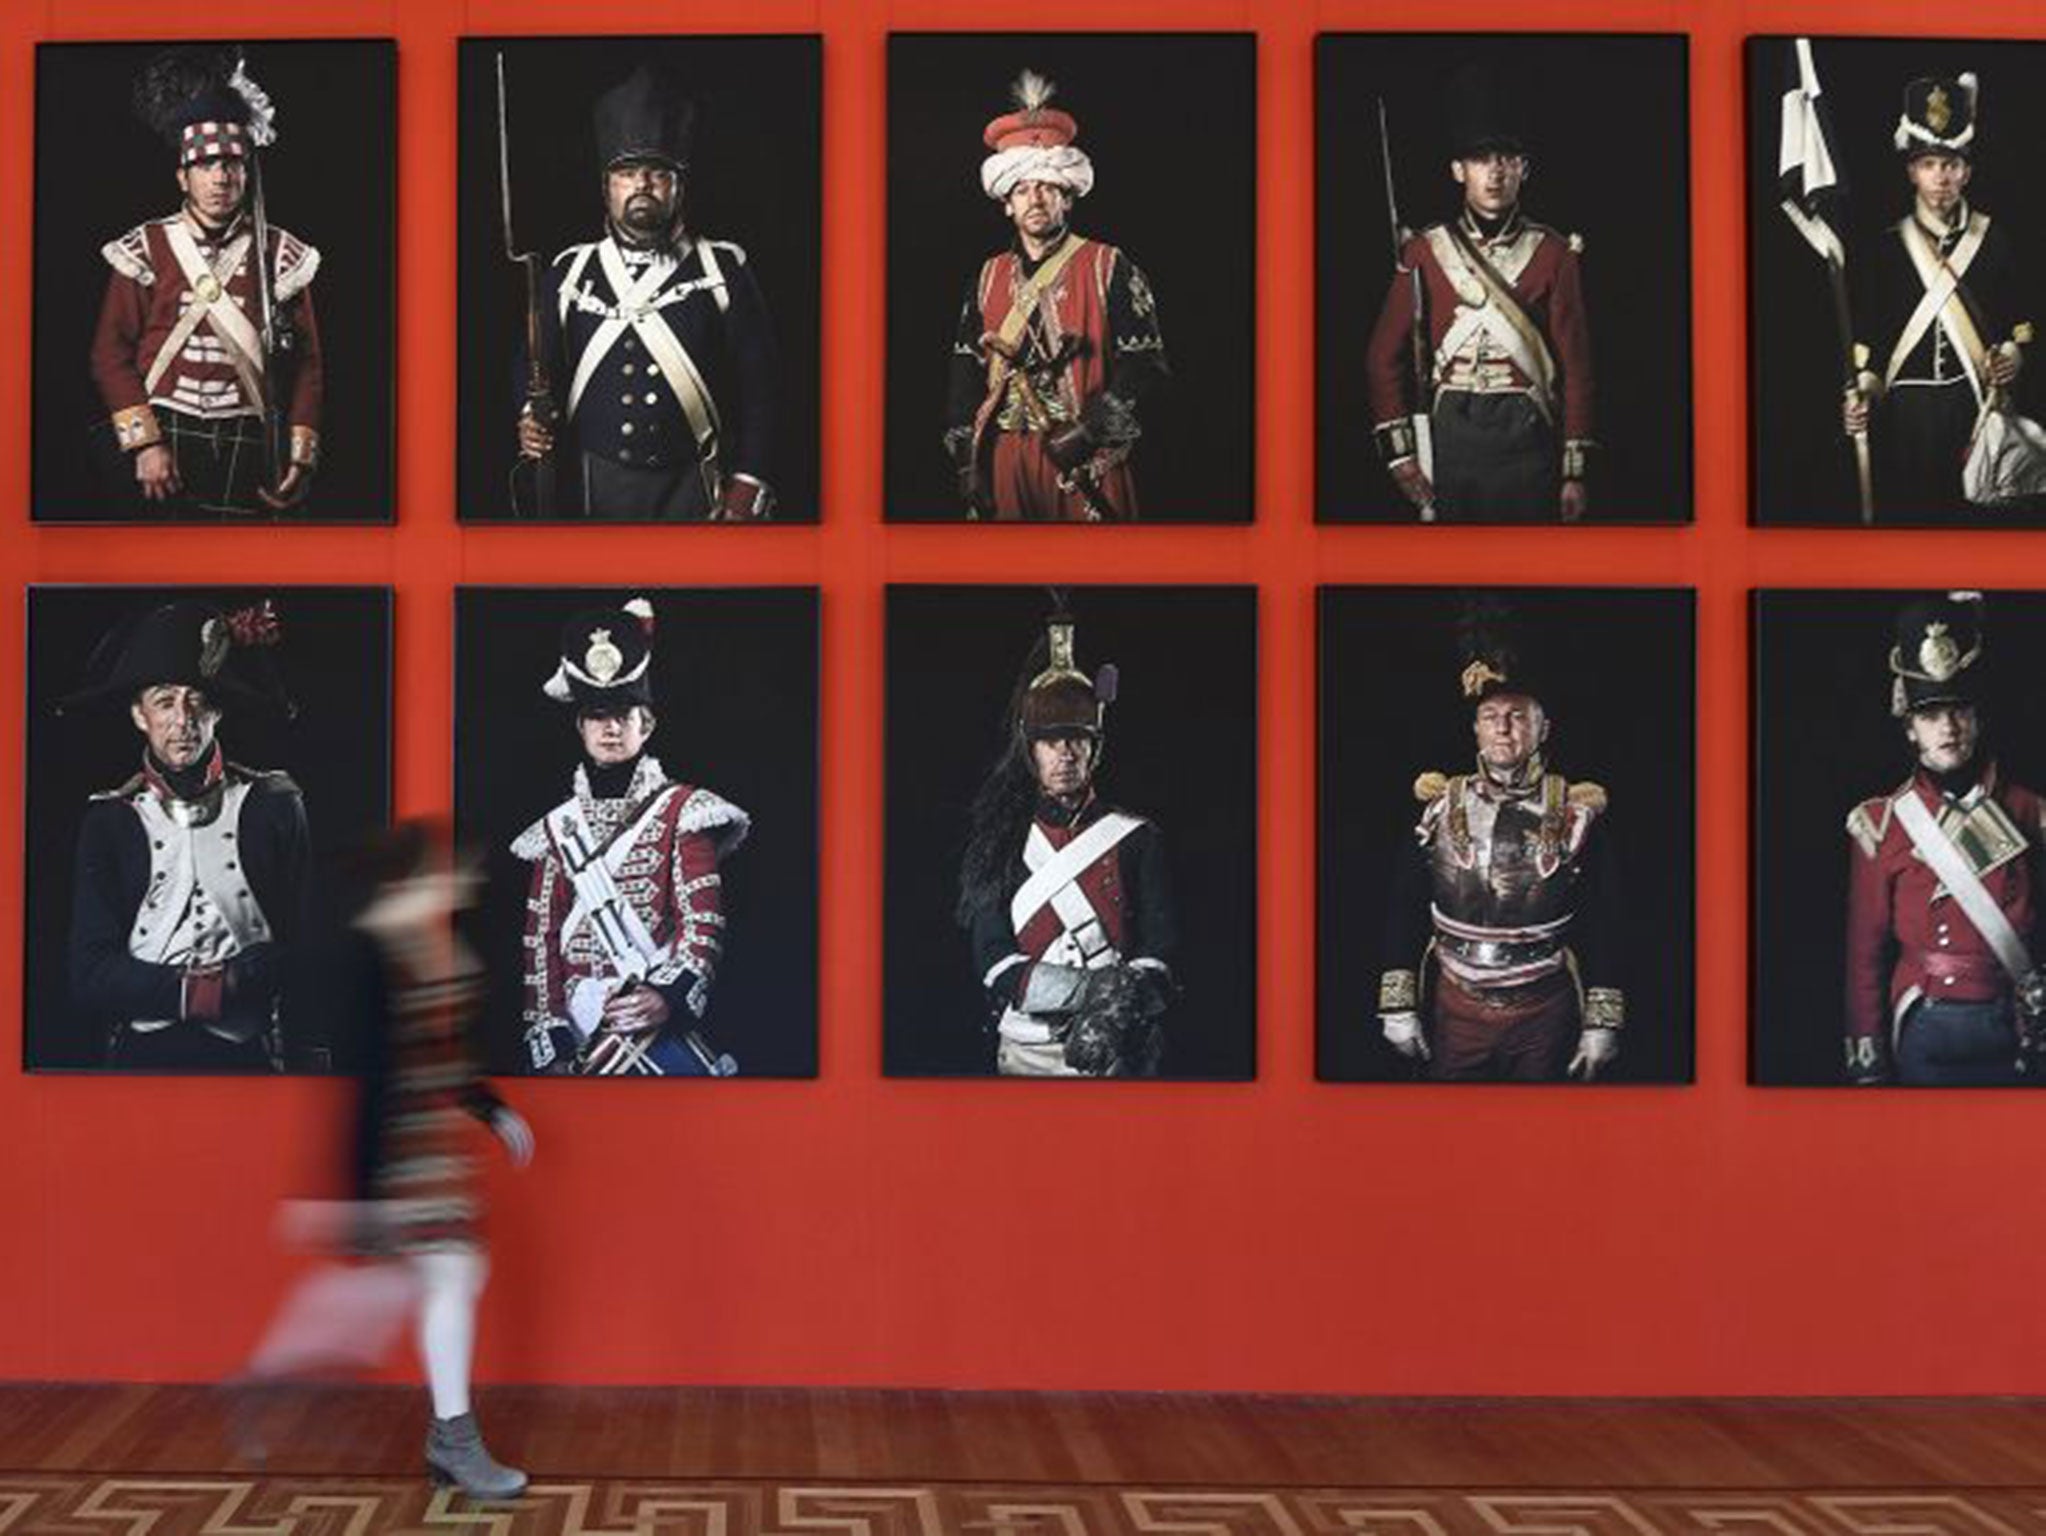 Photographs by Sam Faulkner of re-enactors in ‘Unseen Waterloo’ at Somerset House, London, until 31 August